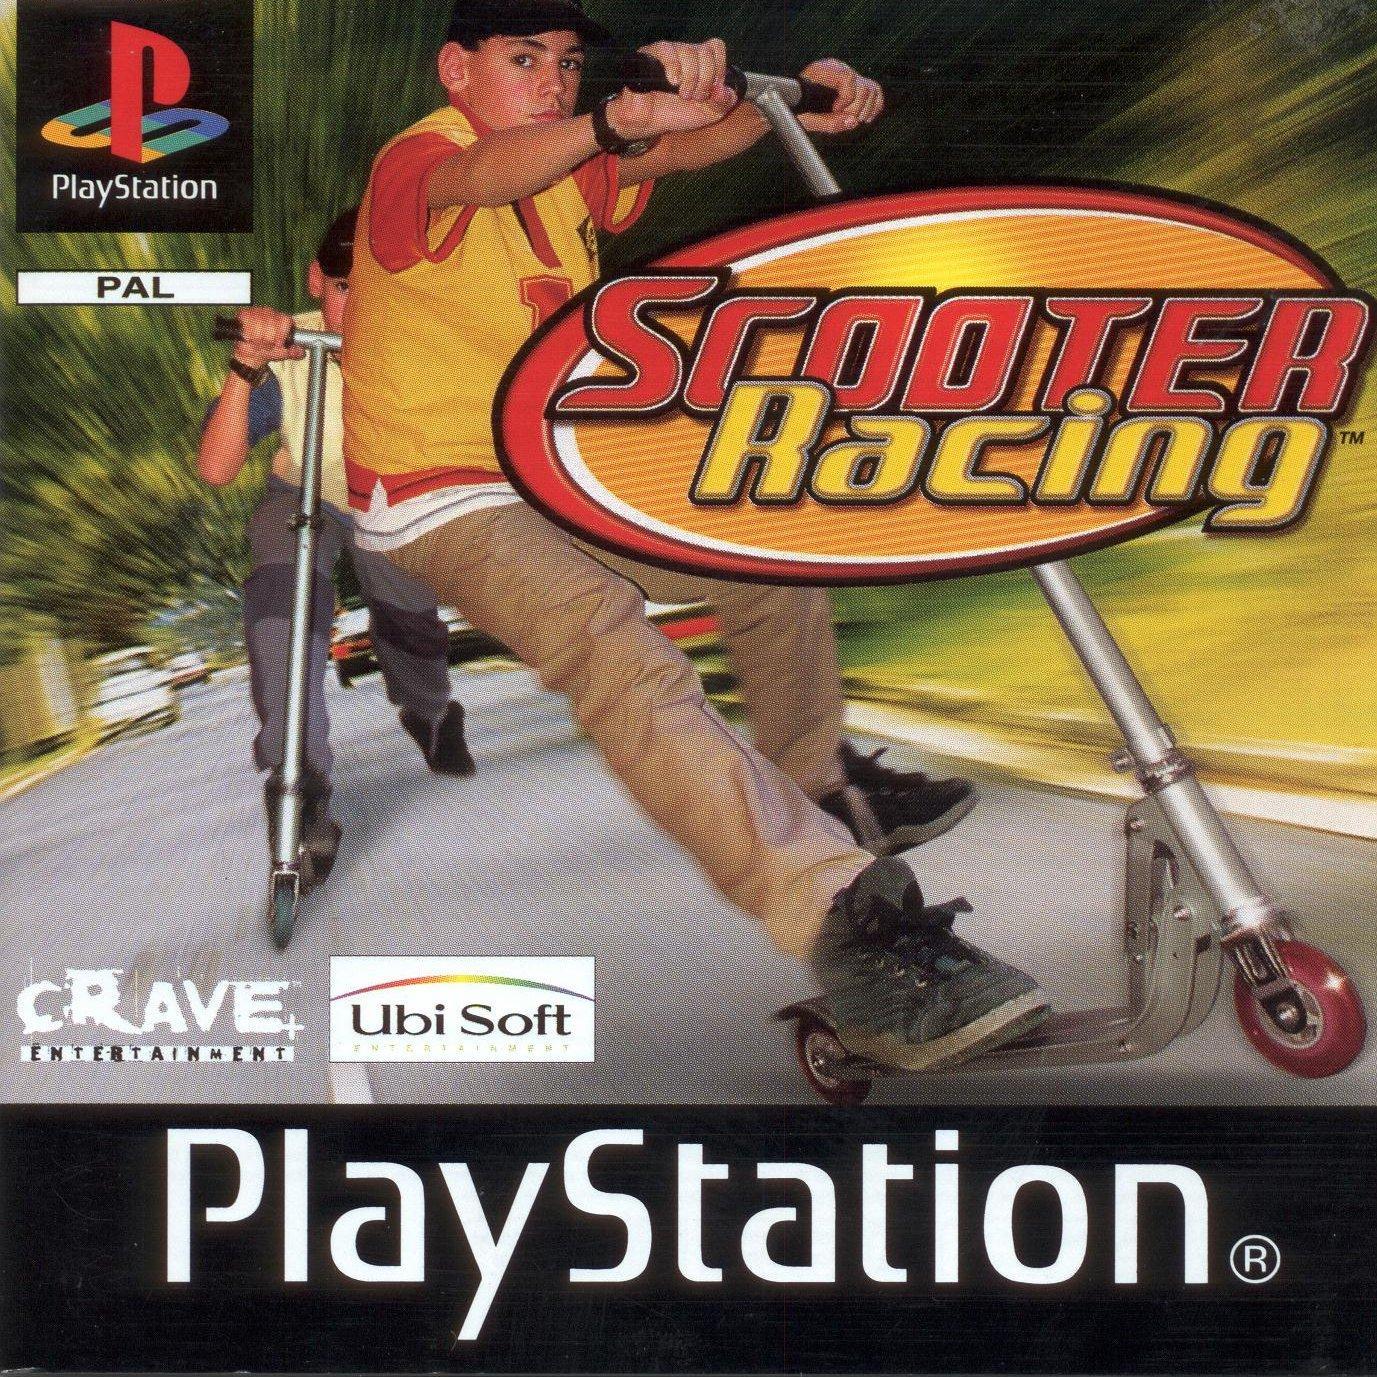 Scooter Racing for psx 